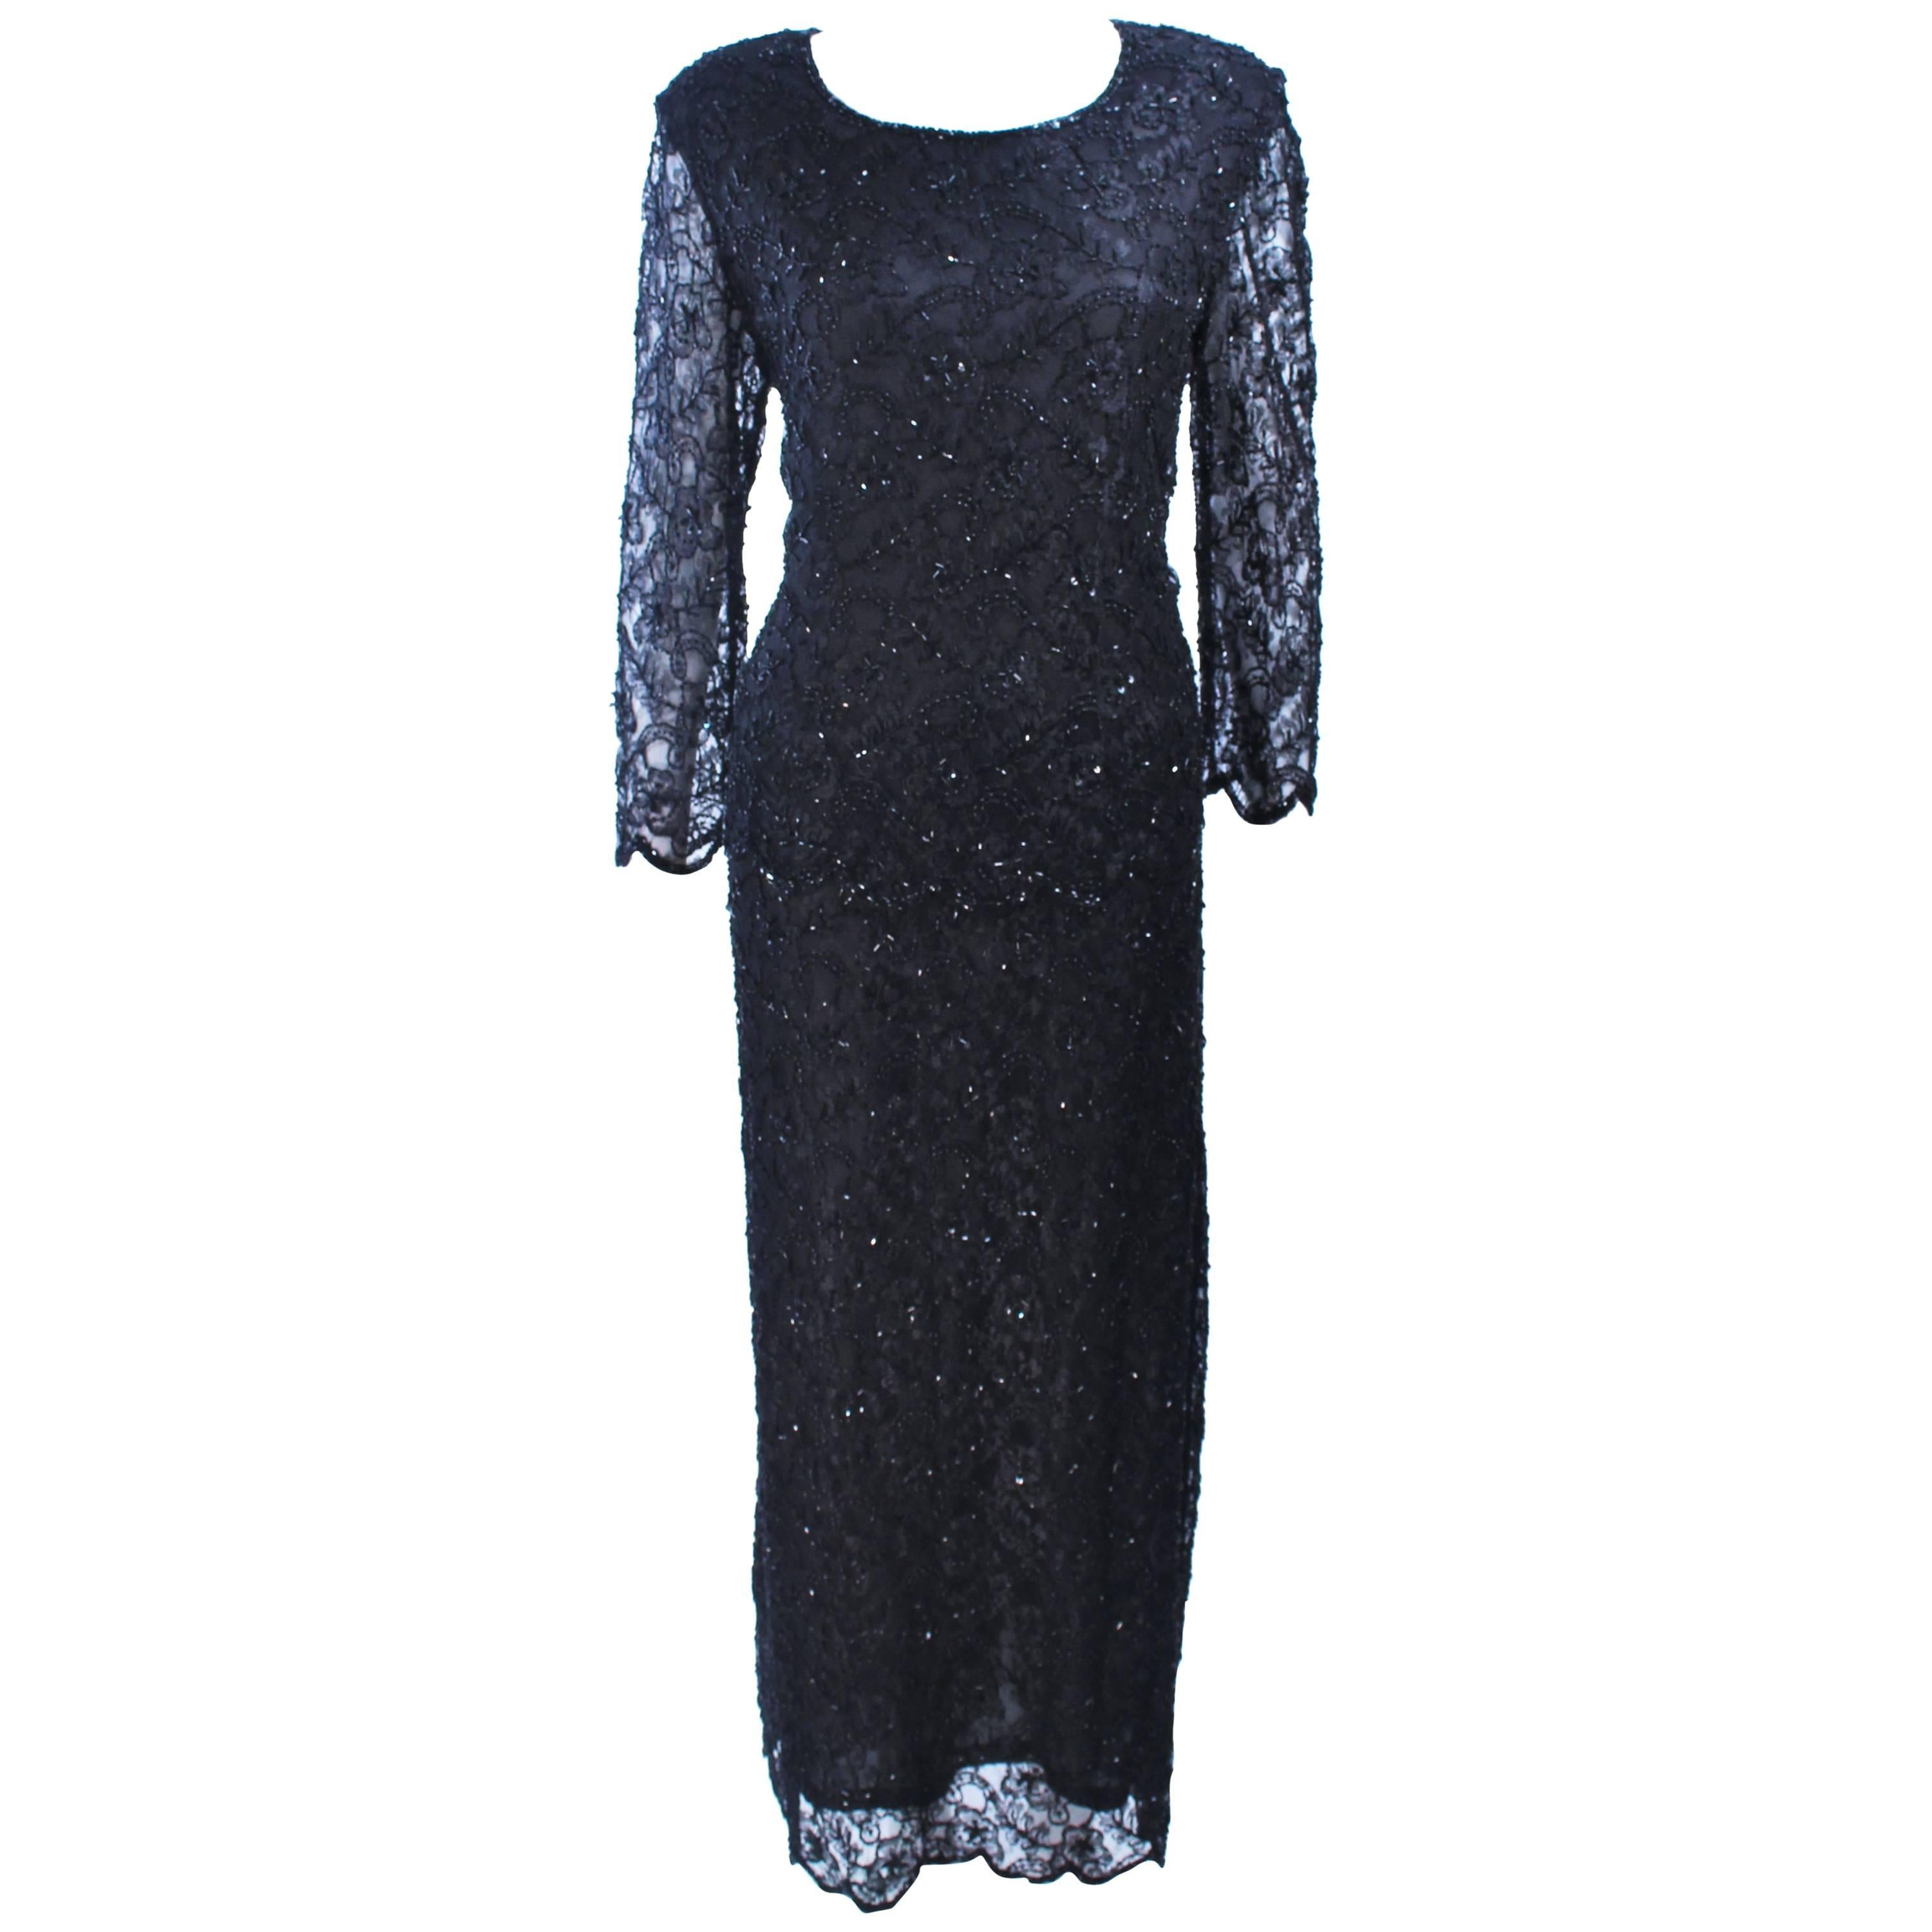 FRANK USHER Black Lace Beaded Gown Sheer Sleeves Size 12